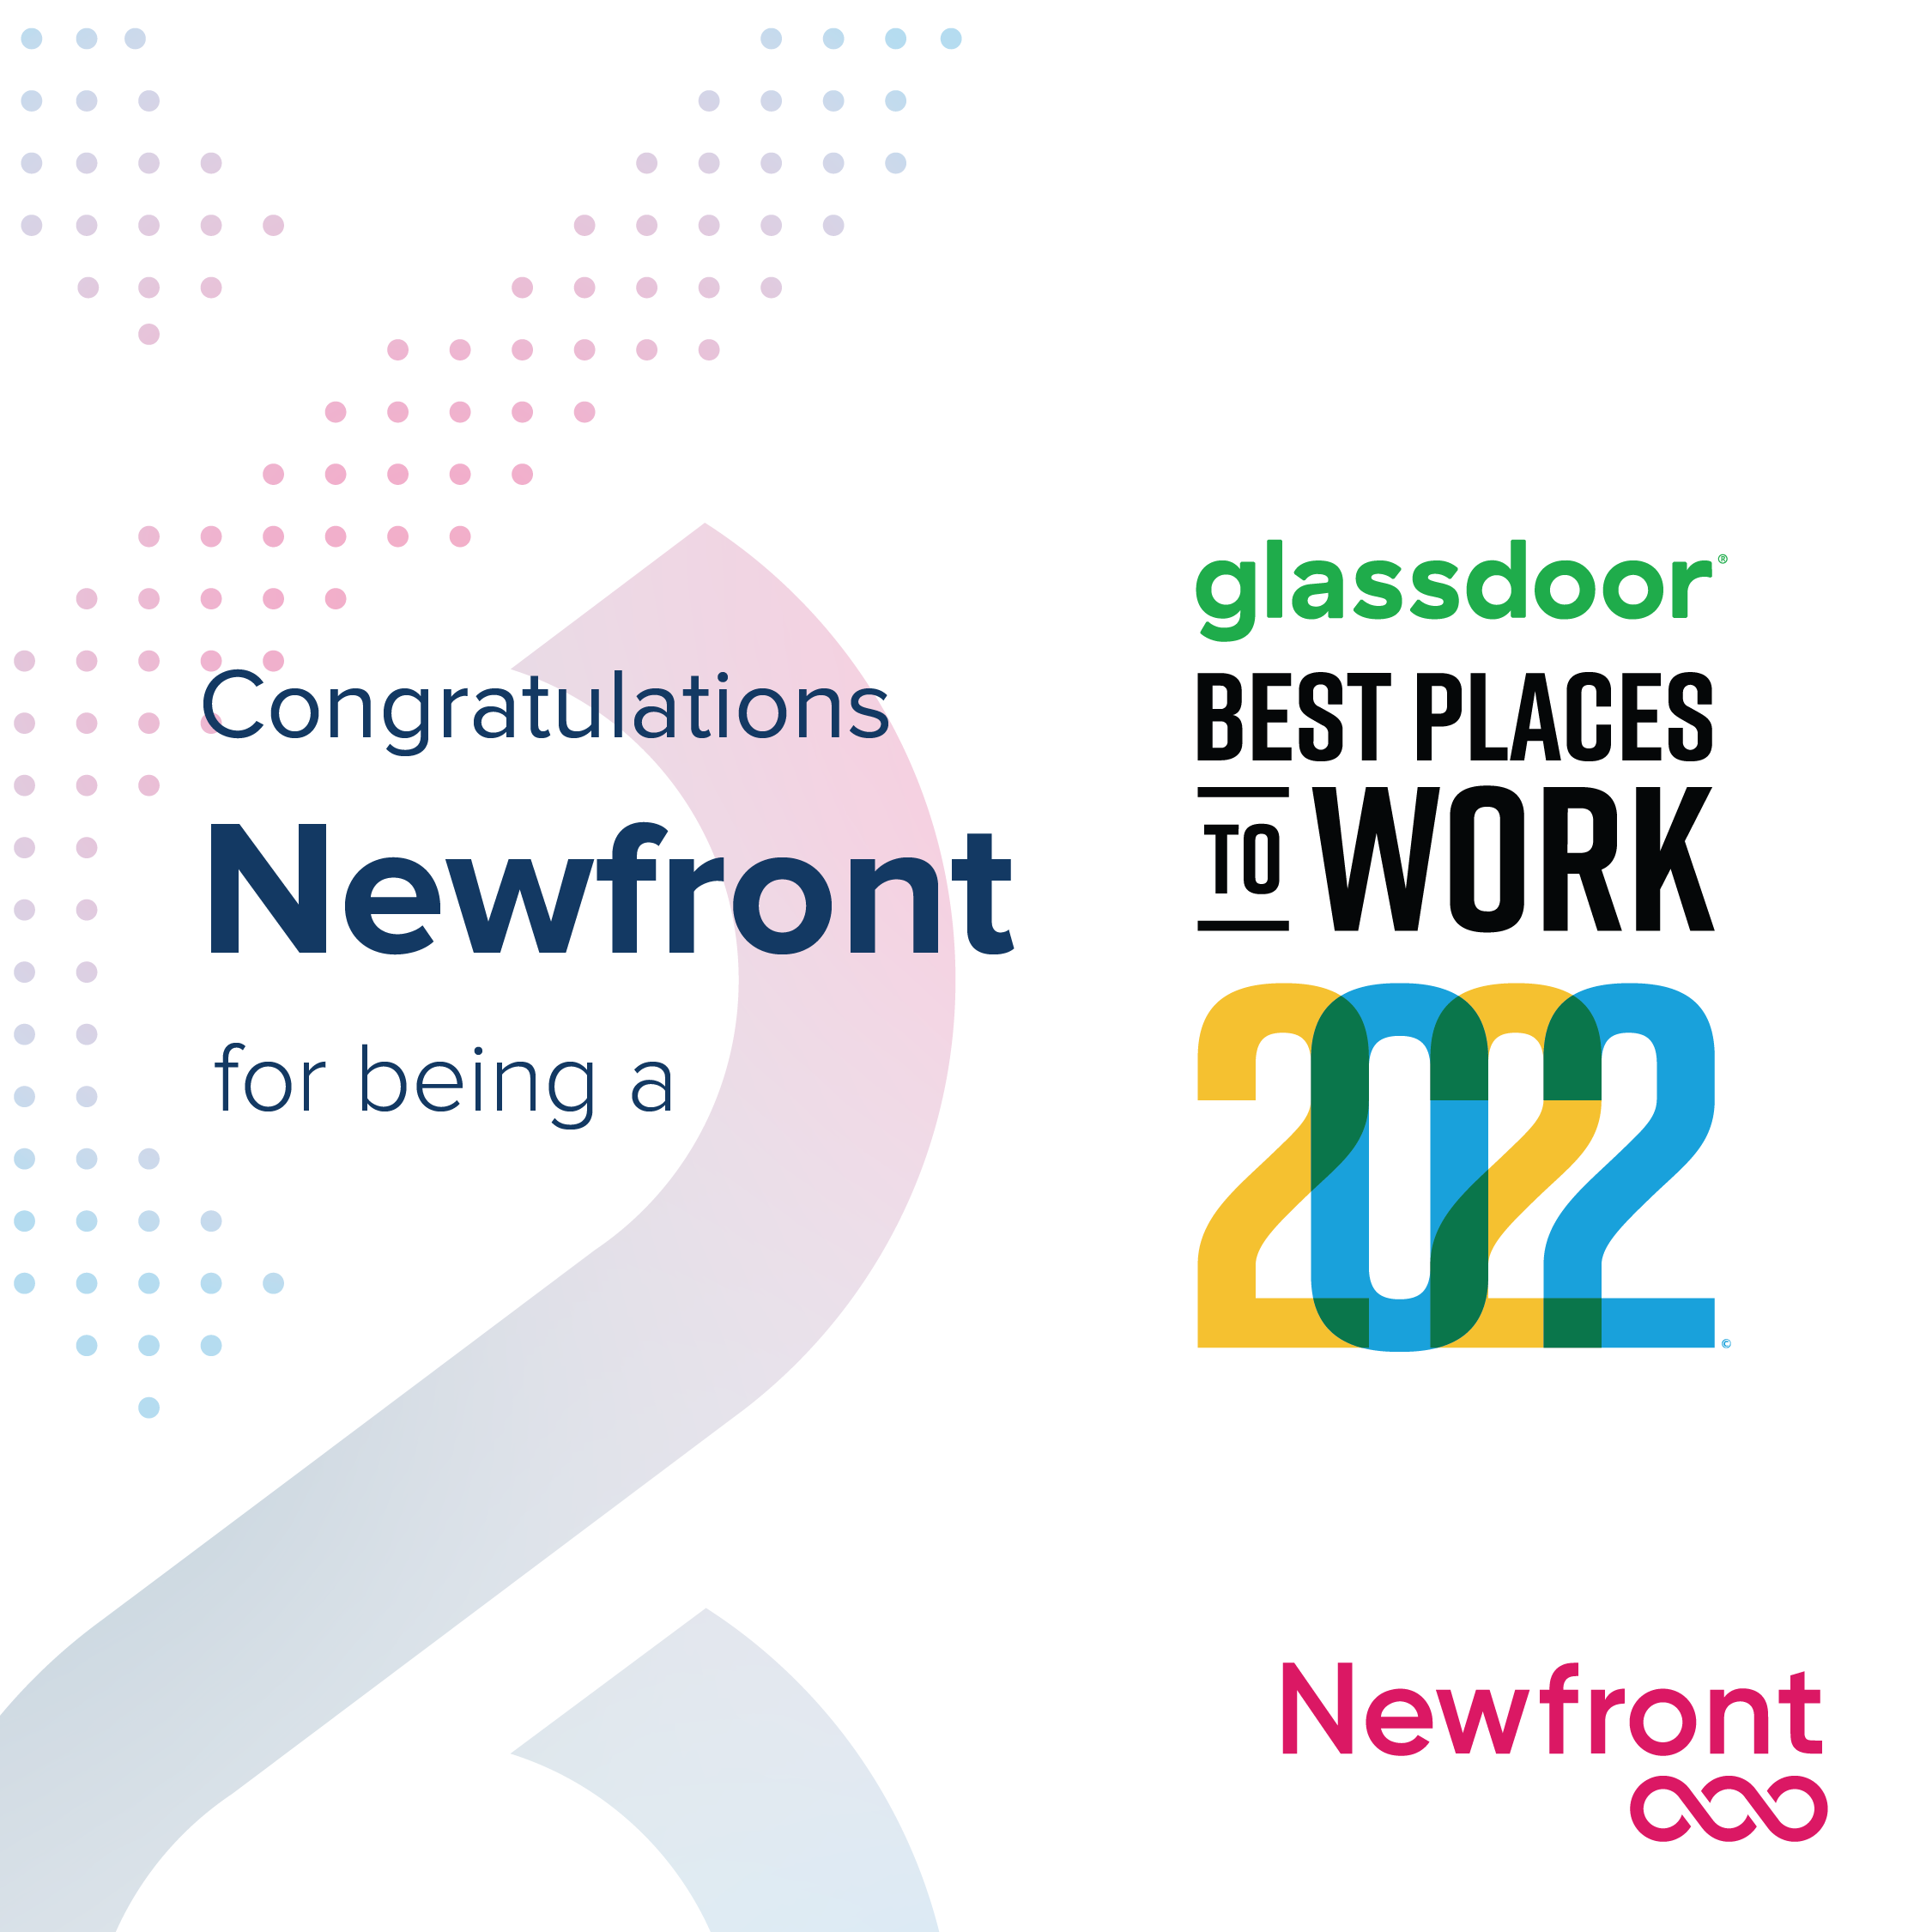 Newfront Honored as One of Glassdoor's Best Places to Work in 2022